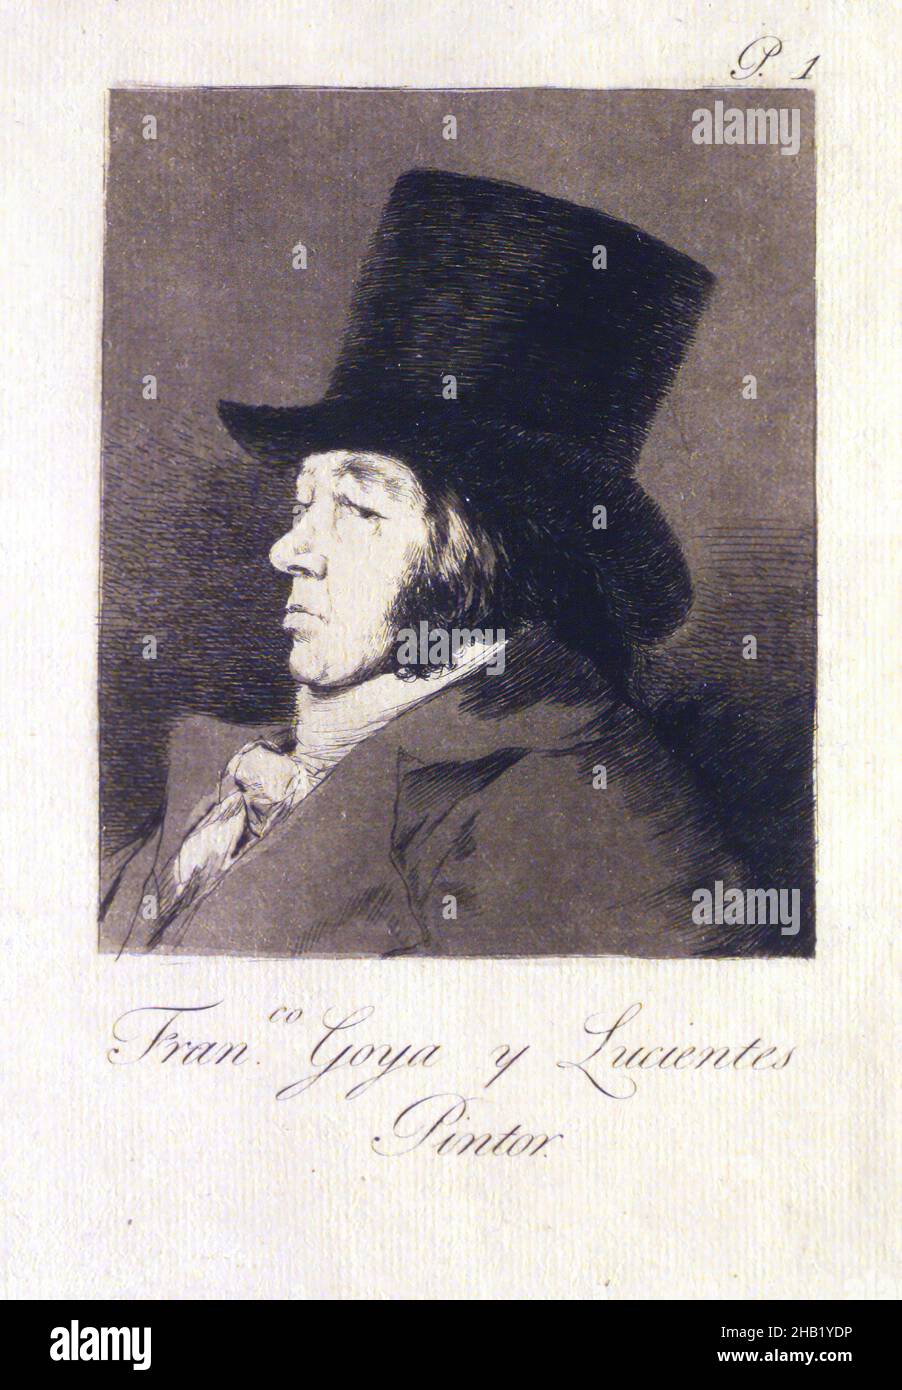 Francisco Goya y Lucientes, Painter, Francisco Goya y Lucientes, Pintor, Los Caprichos, Plate 1, Francisco de Goya y Lucientes, Spanish, 1746-1828, Etching, aquatint, drypoint, and burin on laid paper, Spain, 1797-1798, Sheet: 11 13/16 x 7 5/8 in., 30 x 19.4 cm, aquatint, drypoint, etching, goya, hat, portrait, self-portrait, spanish Stock Photo